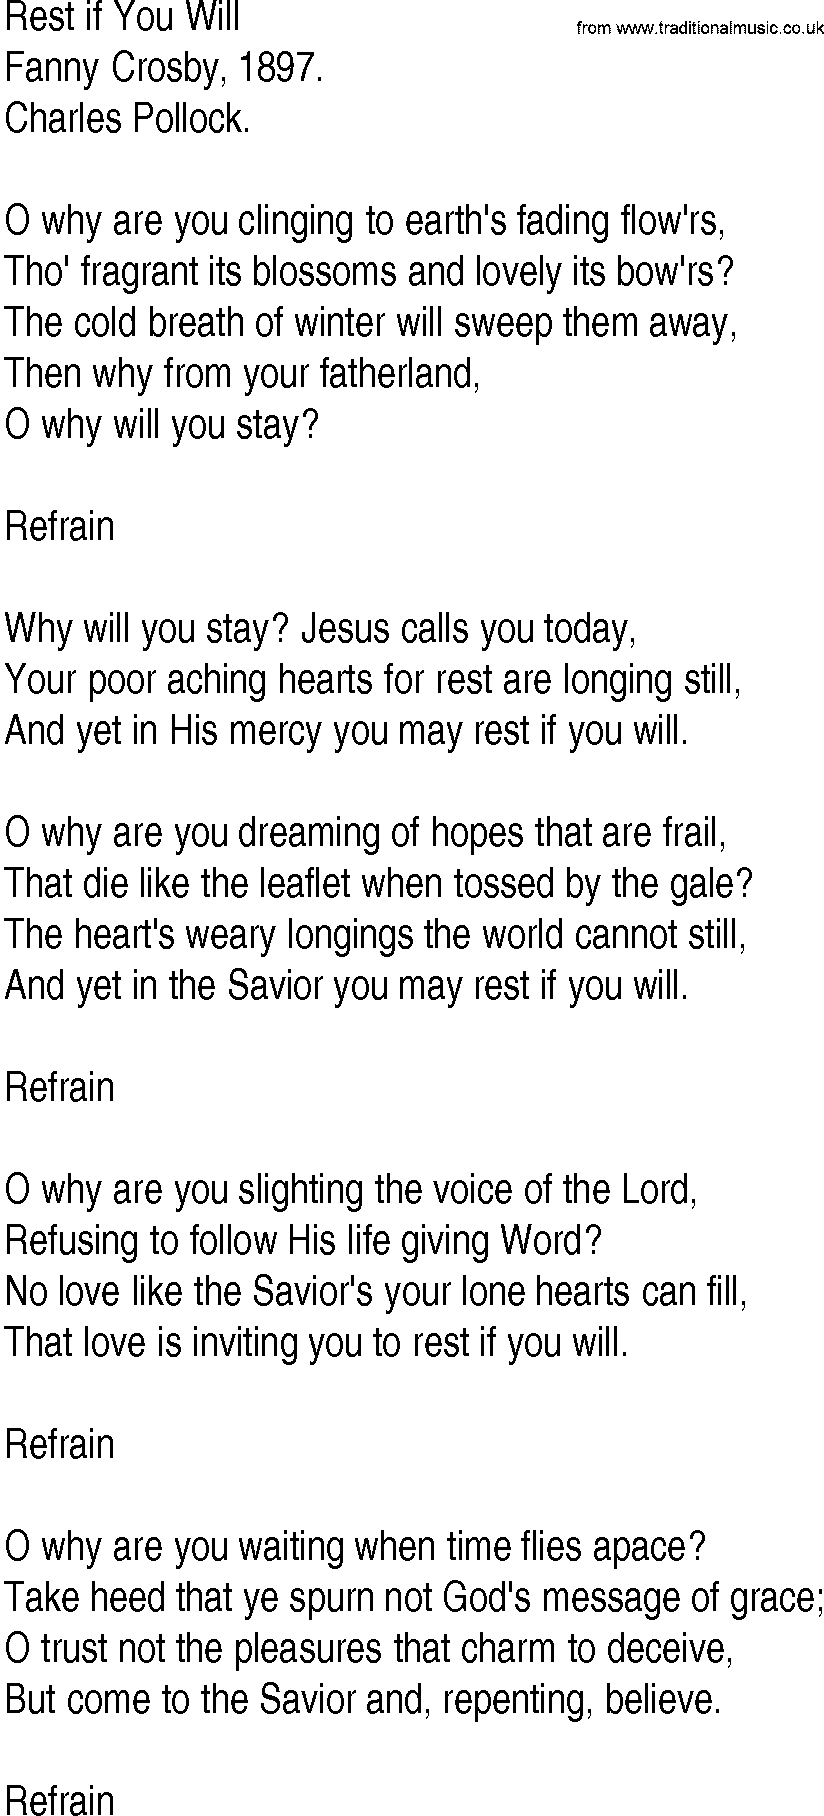 Hymn and Gospel Song: Rest if You Will by Fanny Crosby lyrics